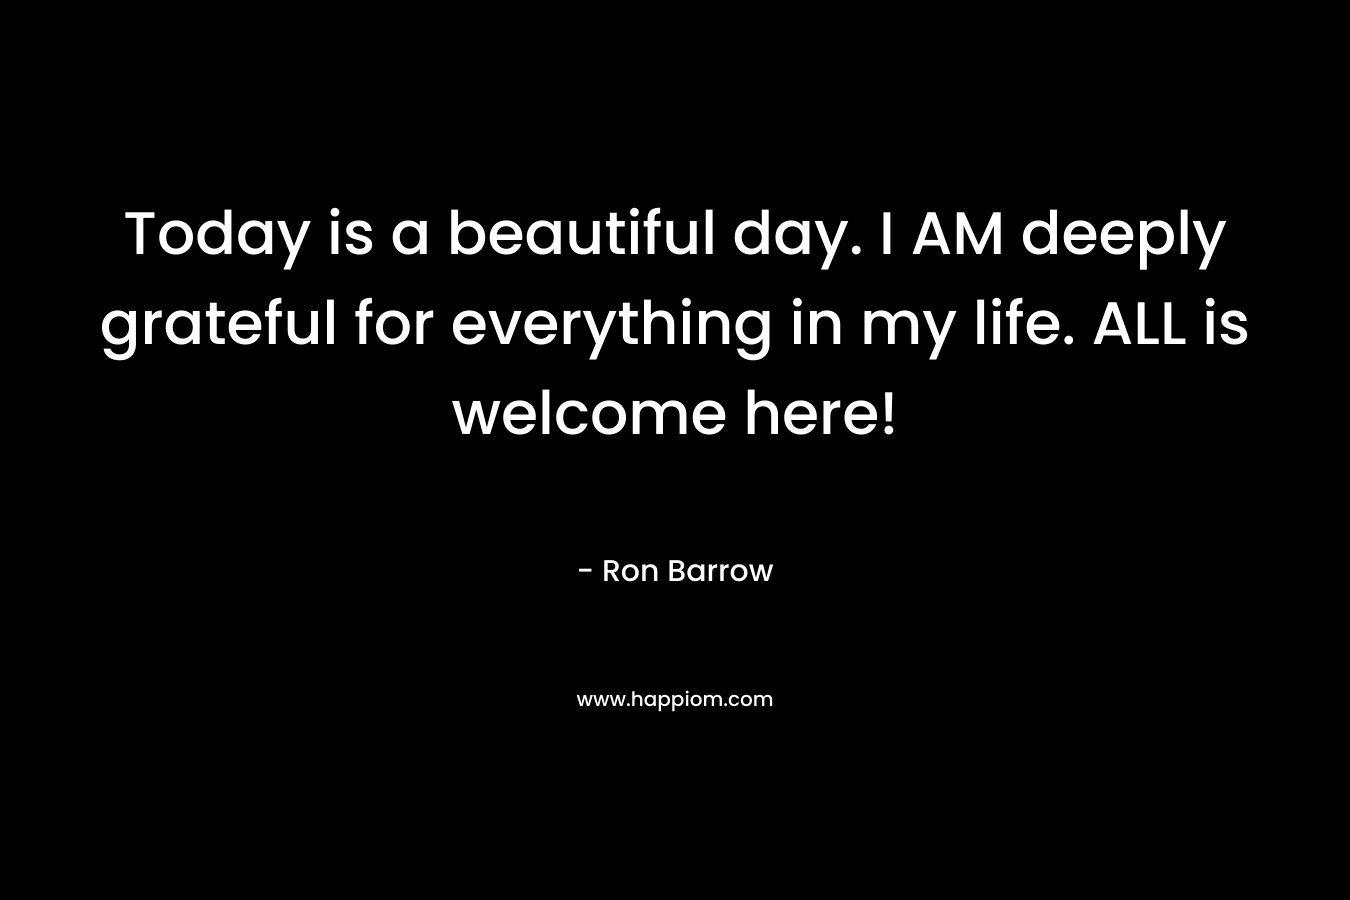 Today is a beautiful day. I AM deeply grateful for everything in my life. ALL is welcome here!